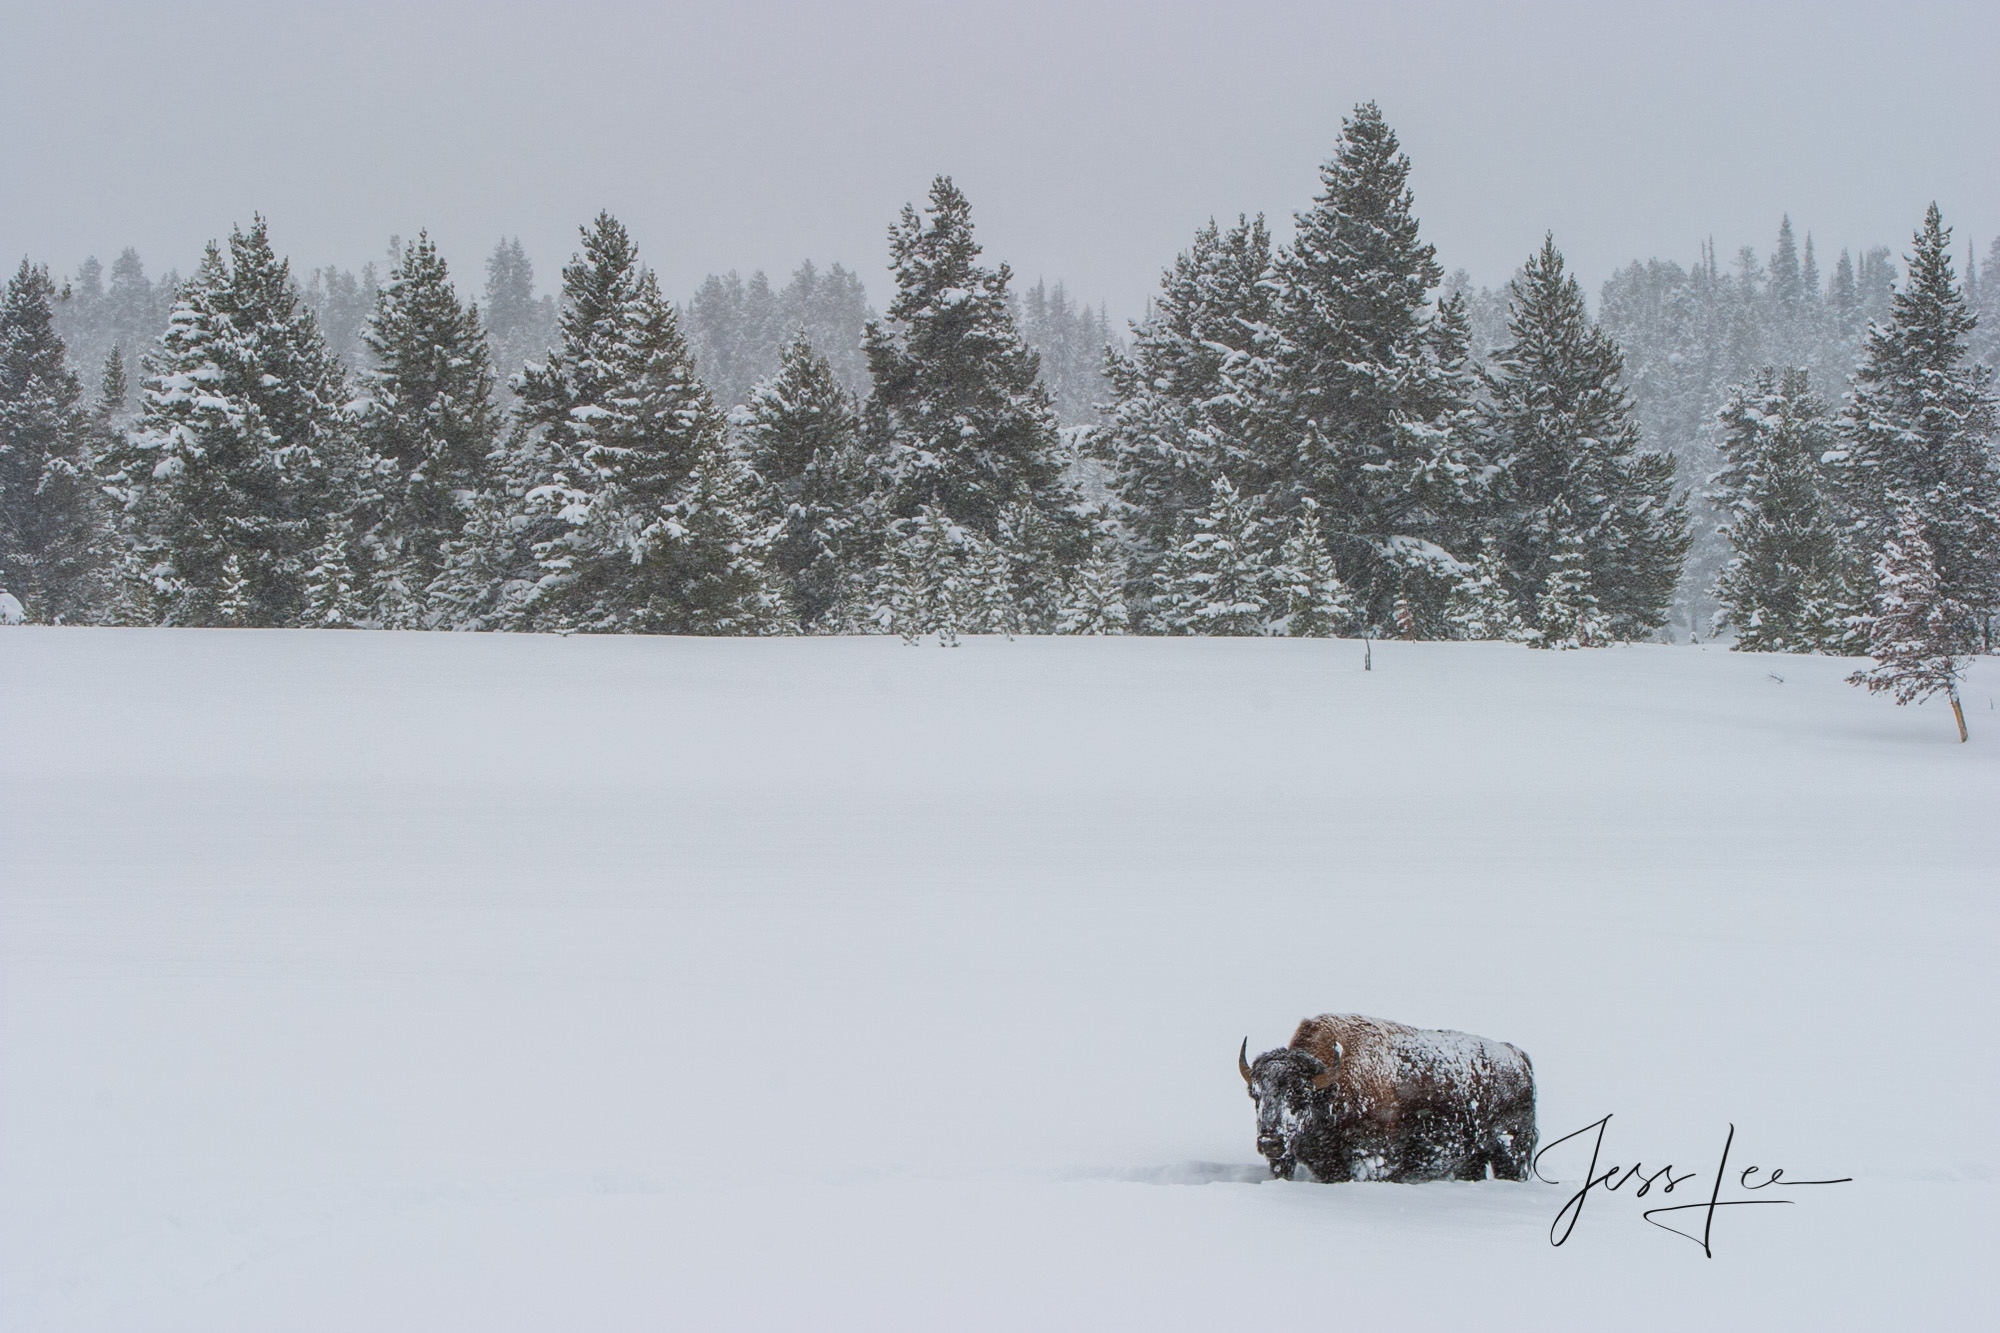 Yellowstone Bison or American Buffalo.. A Limited Edition of 800 Prints. These Lone Bison fine art wildlife photographs are offered...